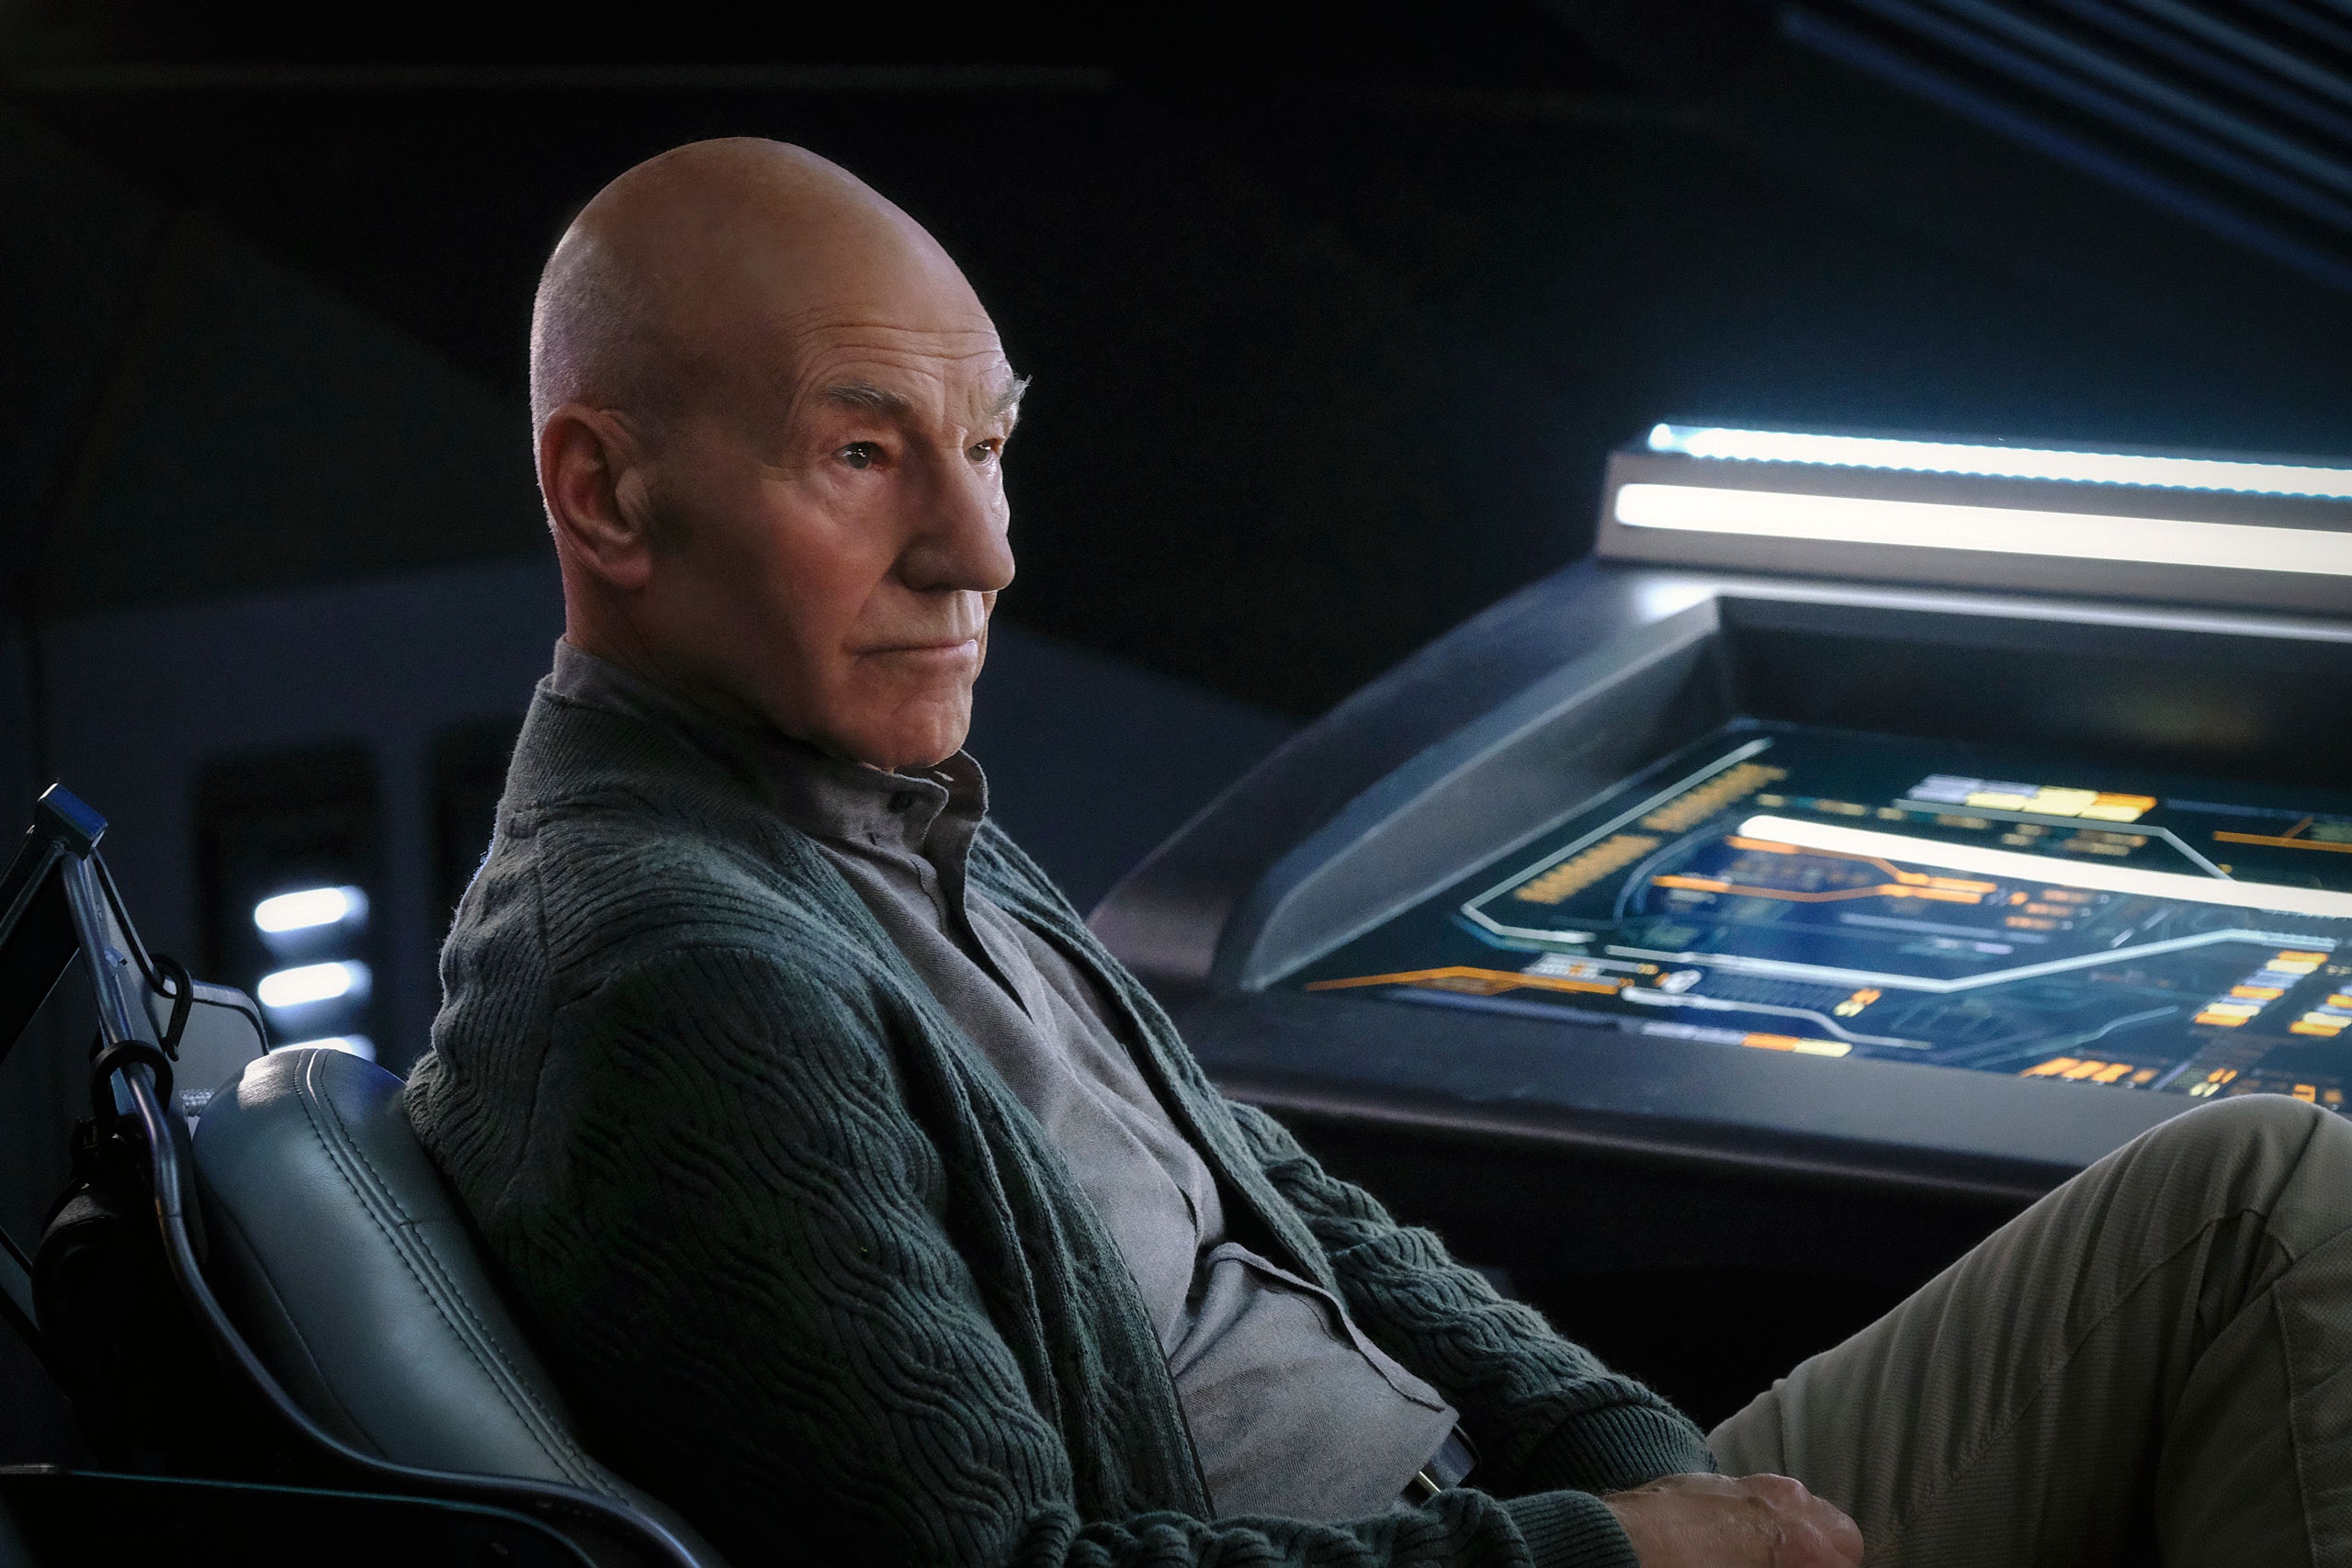 Weekly Sci Fi TV Top 5: Star Trek Picard Proves a Hit, Netflix Picks Up  Live-Action One Piece, and More - Cancelled Sci Fi